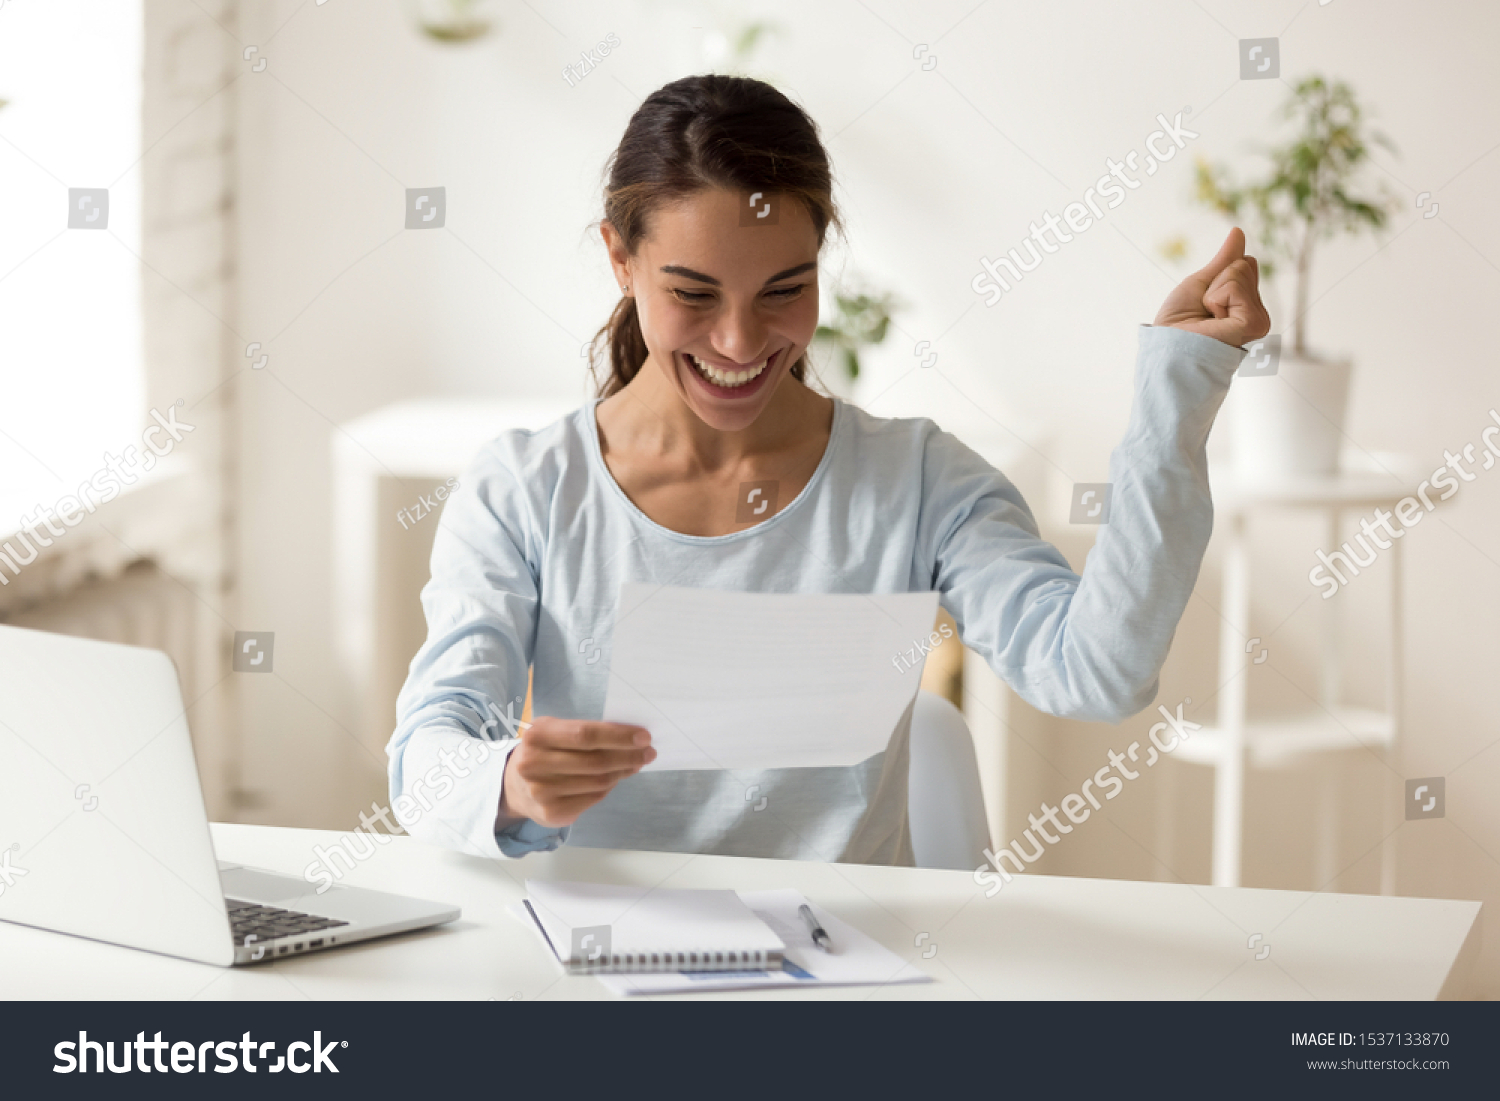 Overjoyed millennial mixed race female worker employee reading letter with good news, celebrating special achievement. Smiling young woman getting bank loan approval or lottery win notification. #1537133870